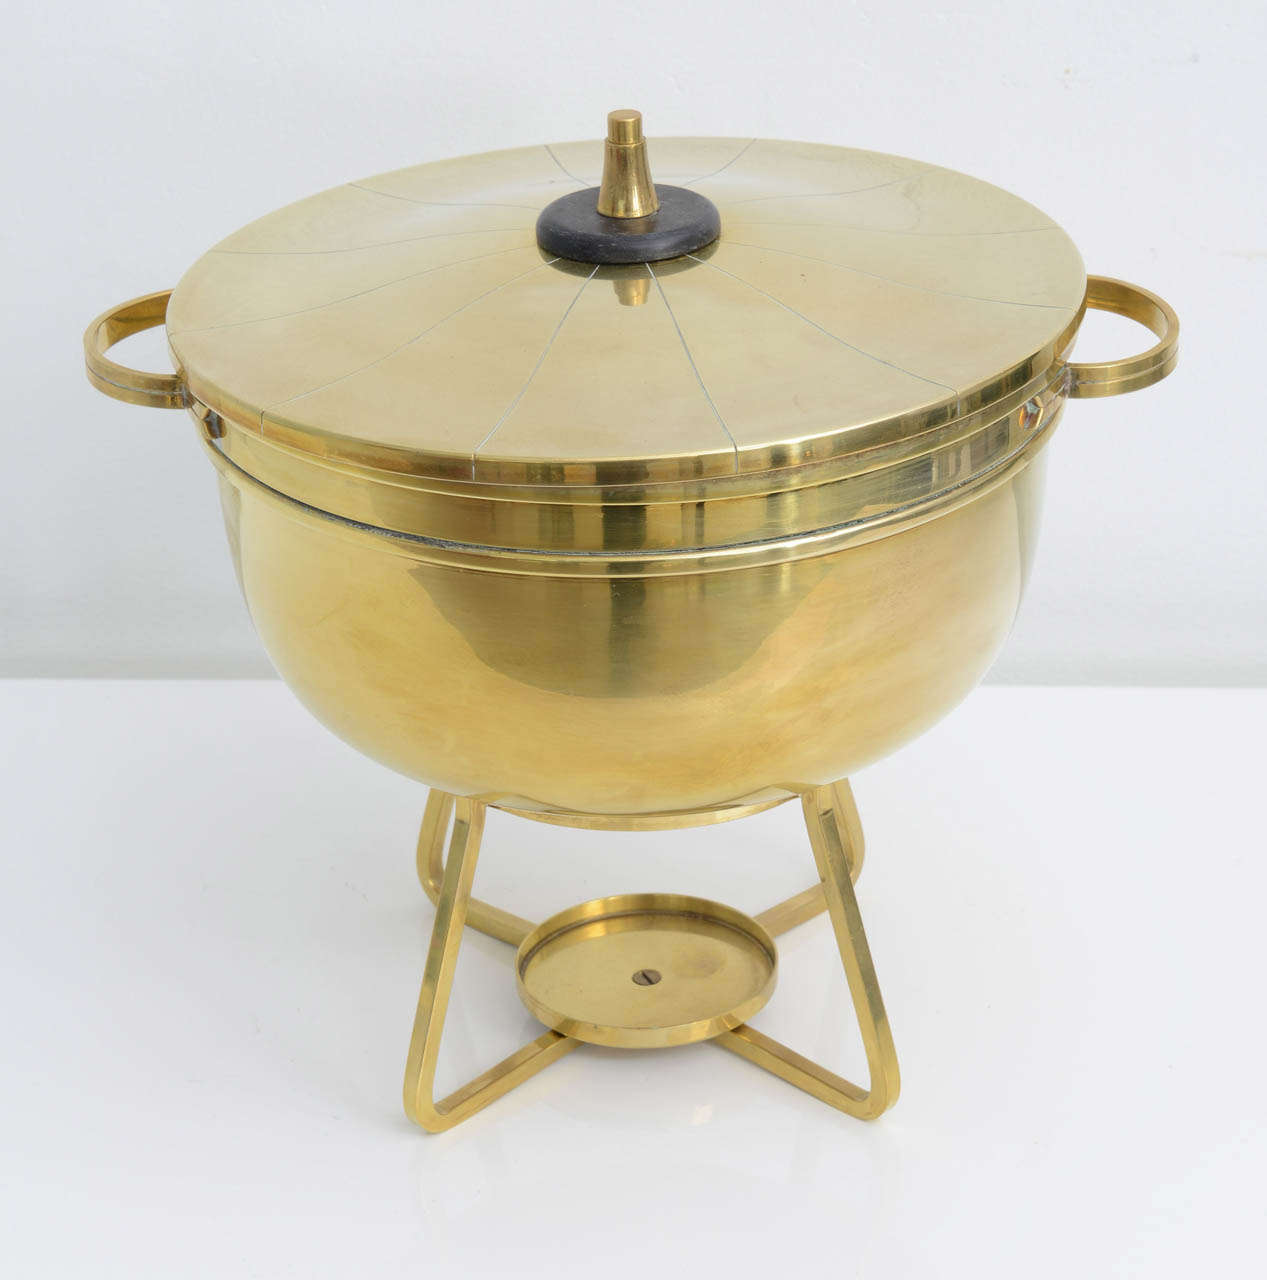 Brass construction with wood accent on lid